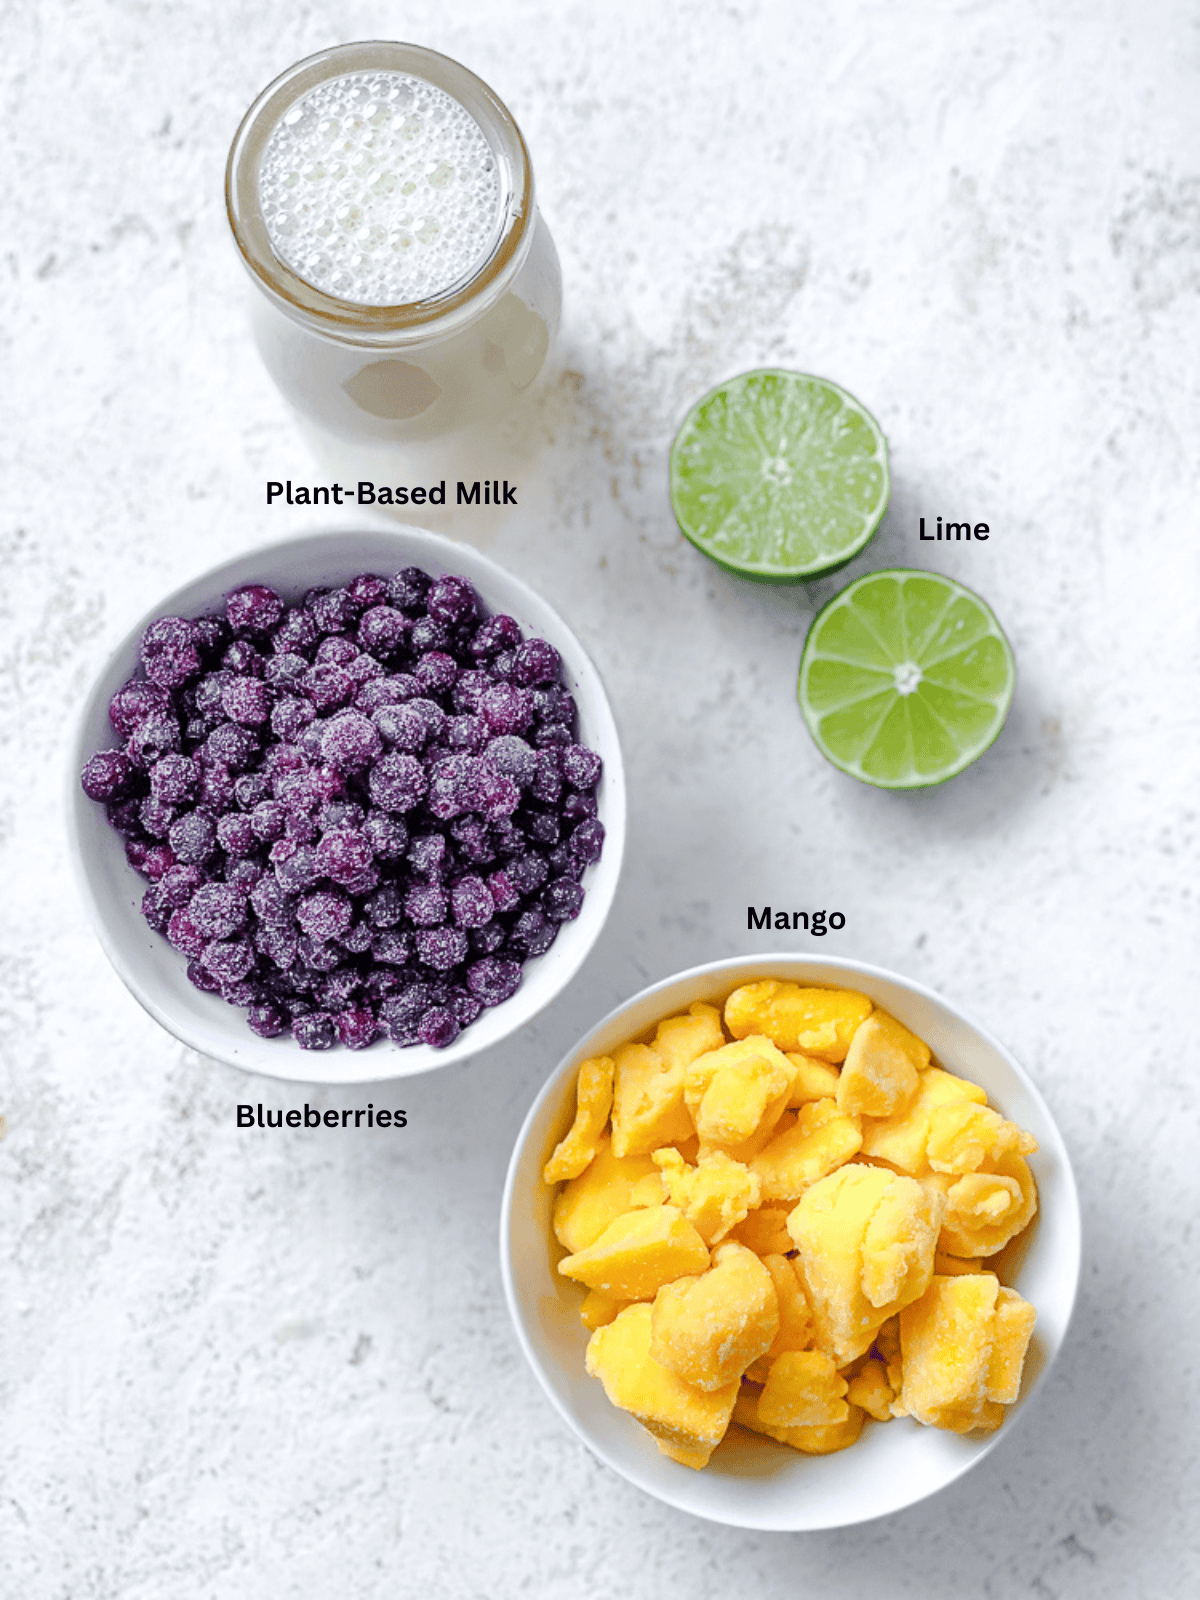 ingredients for Mango Blueberry Smoothie measured out on a white surface